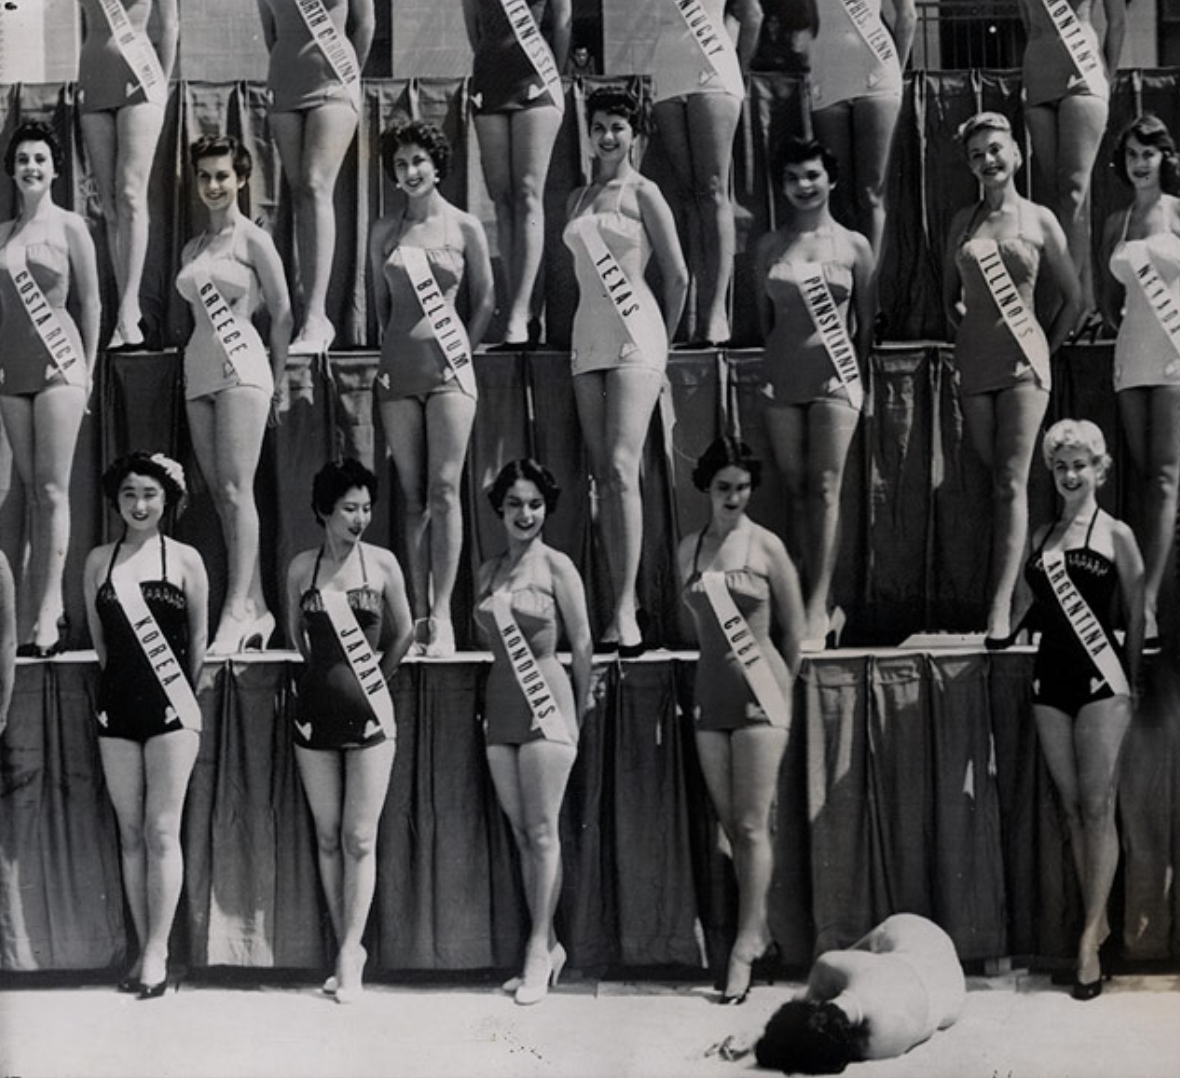 Miss New Zealand passes out from heat exhaustion. Long Beach, California (7-19-54).